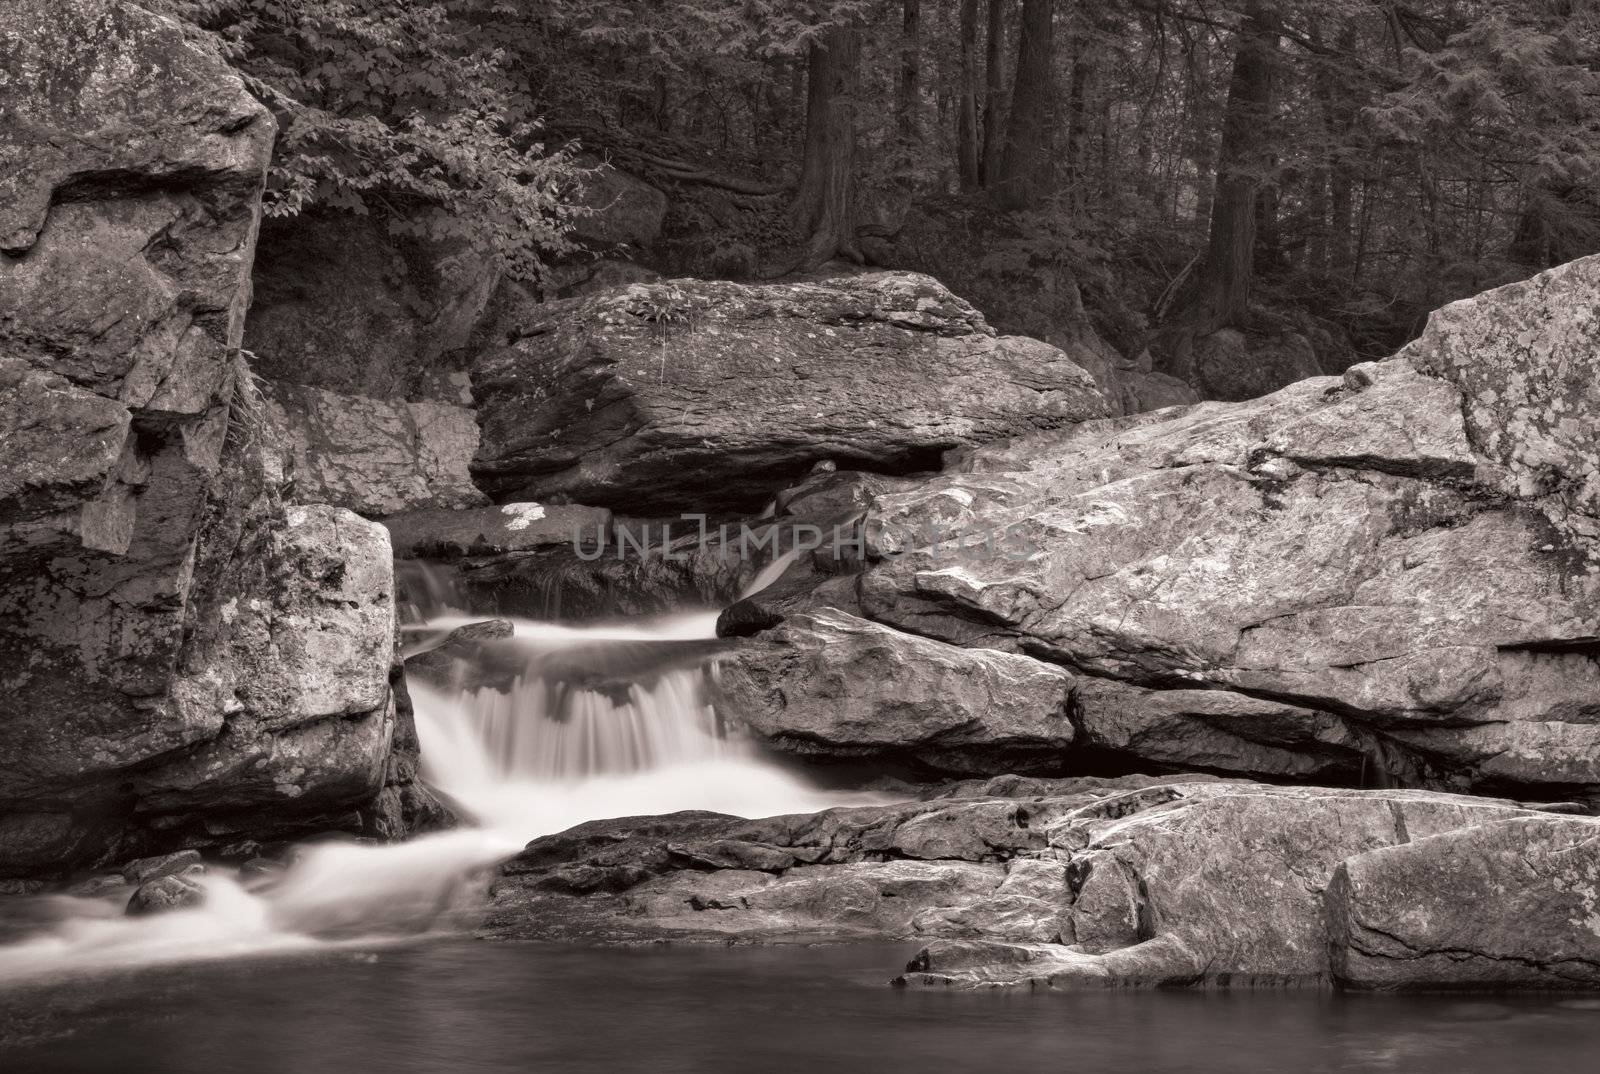 A small waterfall over rock with a forest in the background. Photo is in black and white.